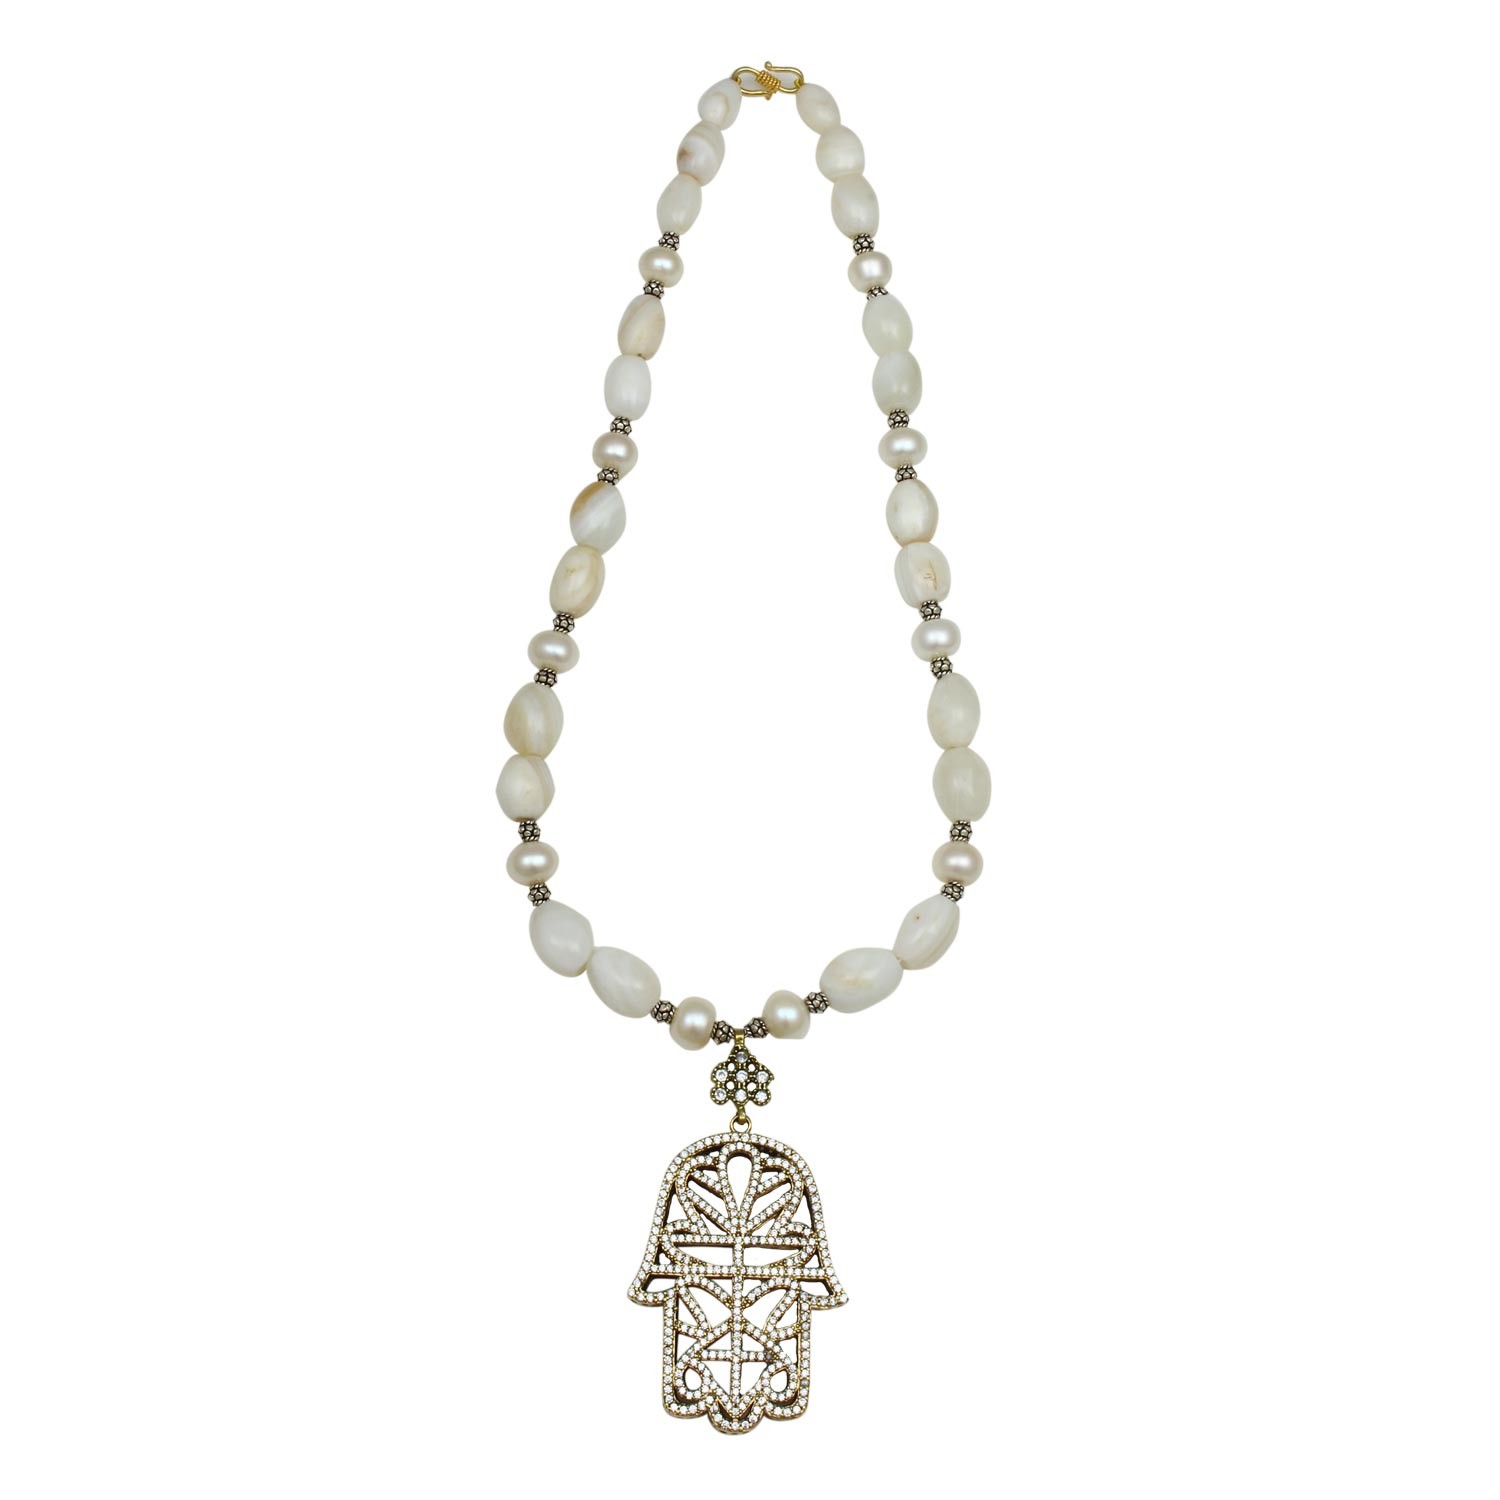 White Agate and Zircon Necklace for Women and Girls